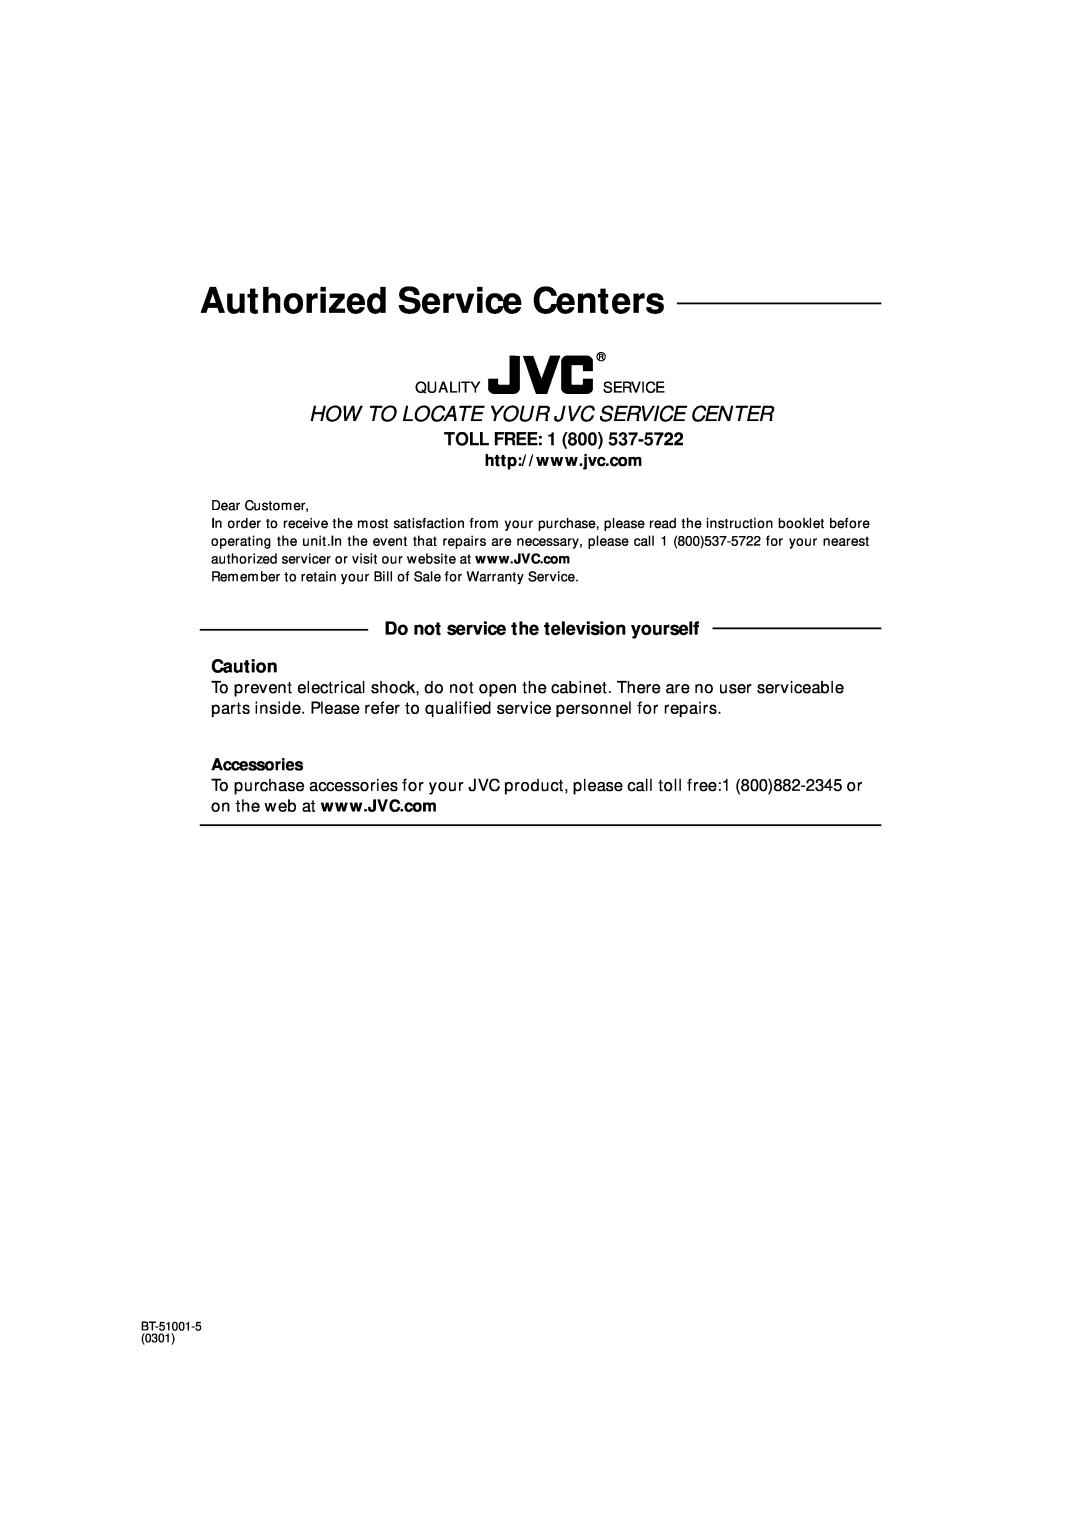 JVC HX-Z3 manual Toll Free, Do not service the television yourself, Authorized Service Centers, Accessories 